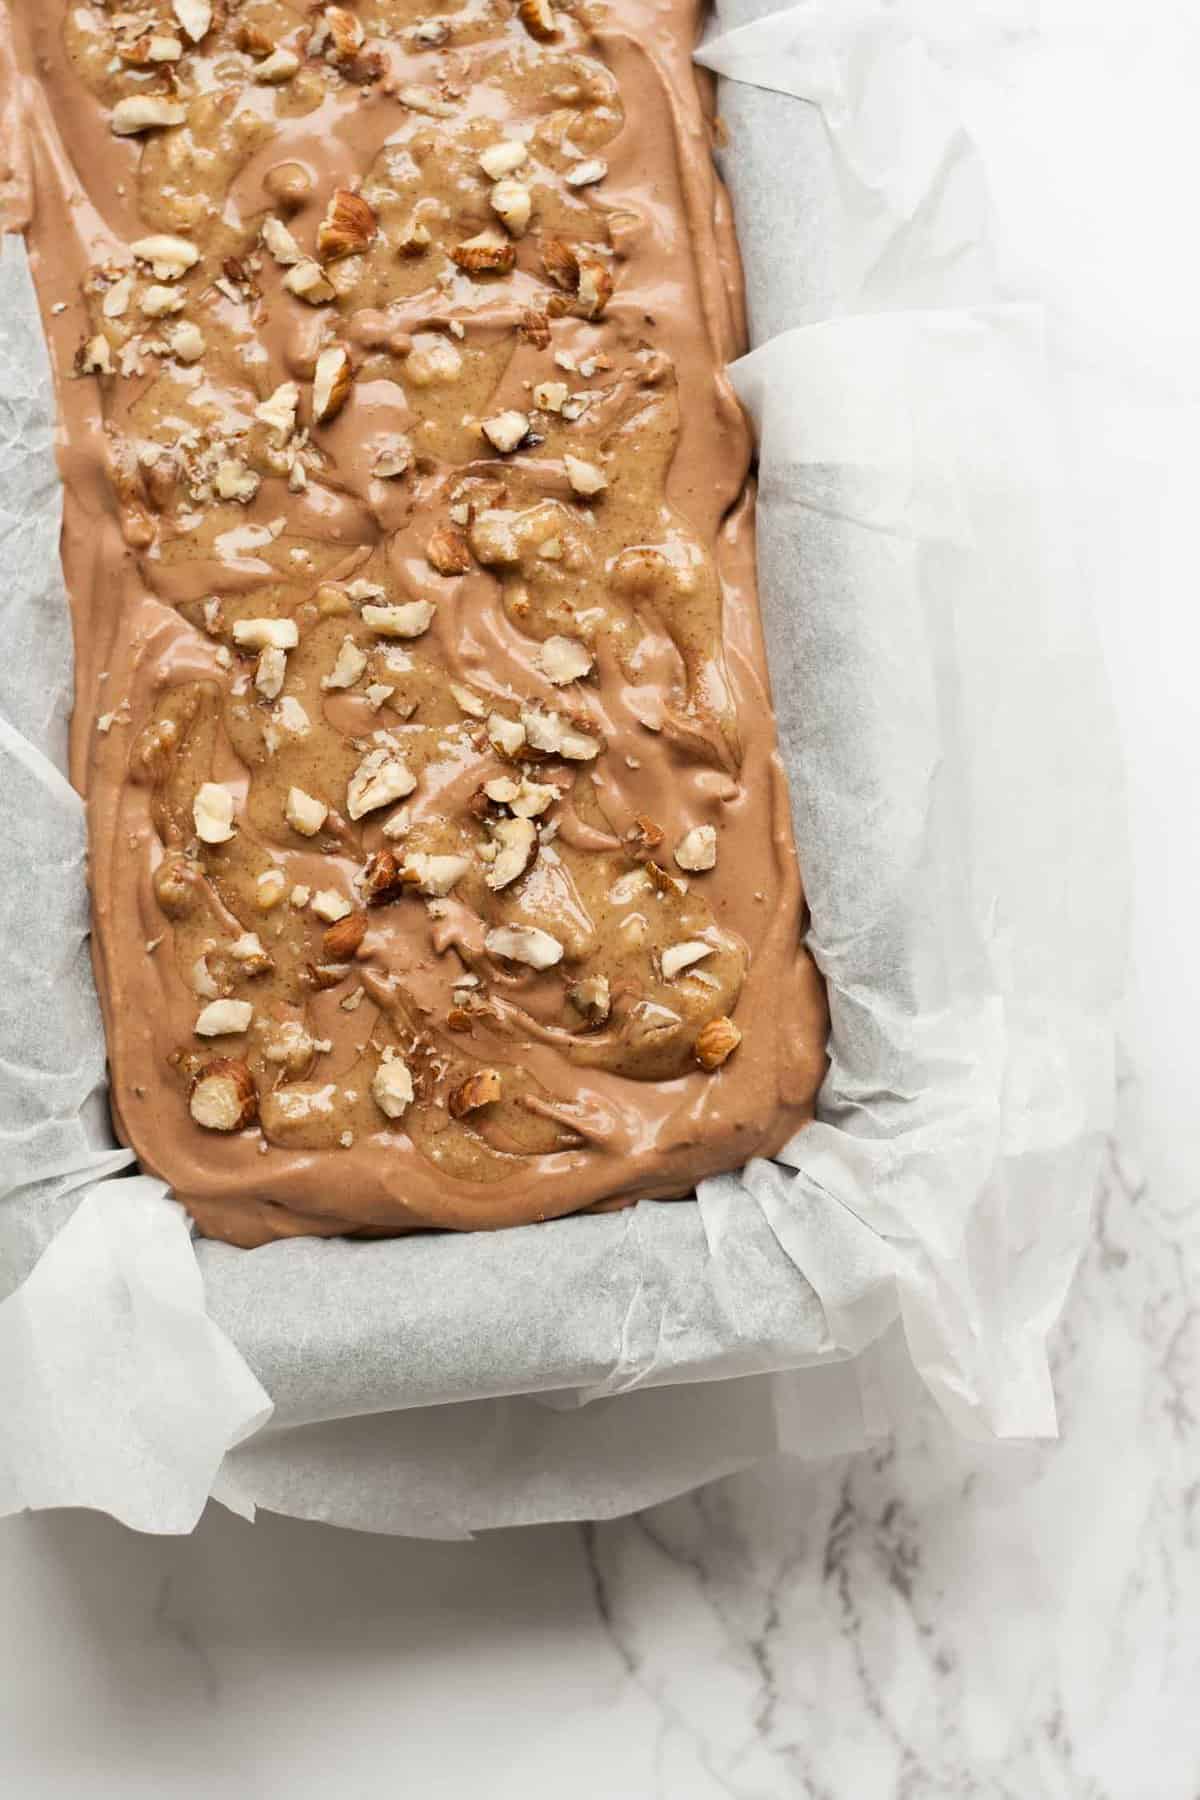 Mocha ice cream mix in a loaf tin lined with parchment paper with nuts on top.